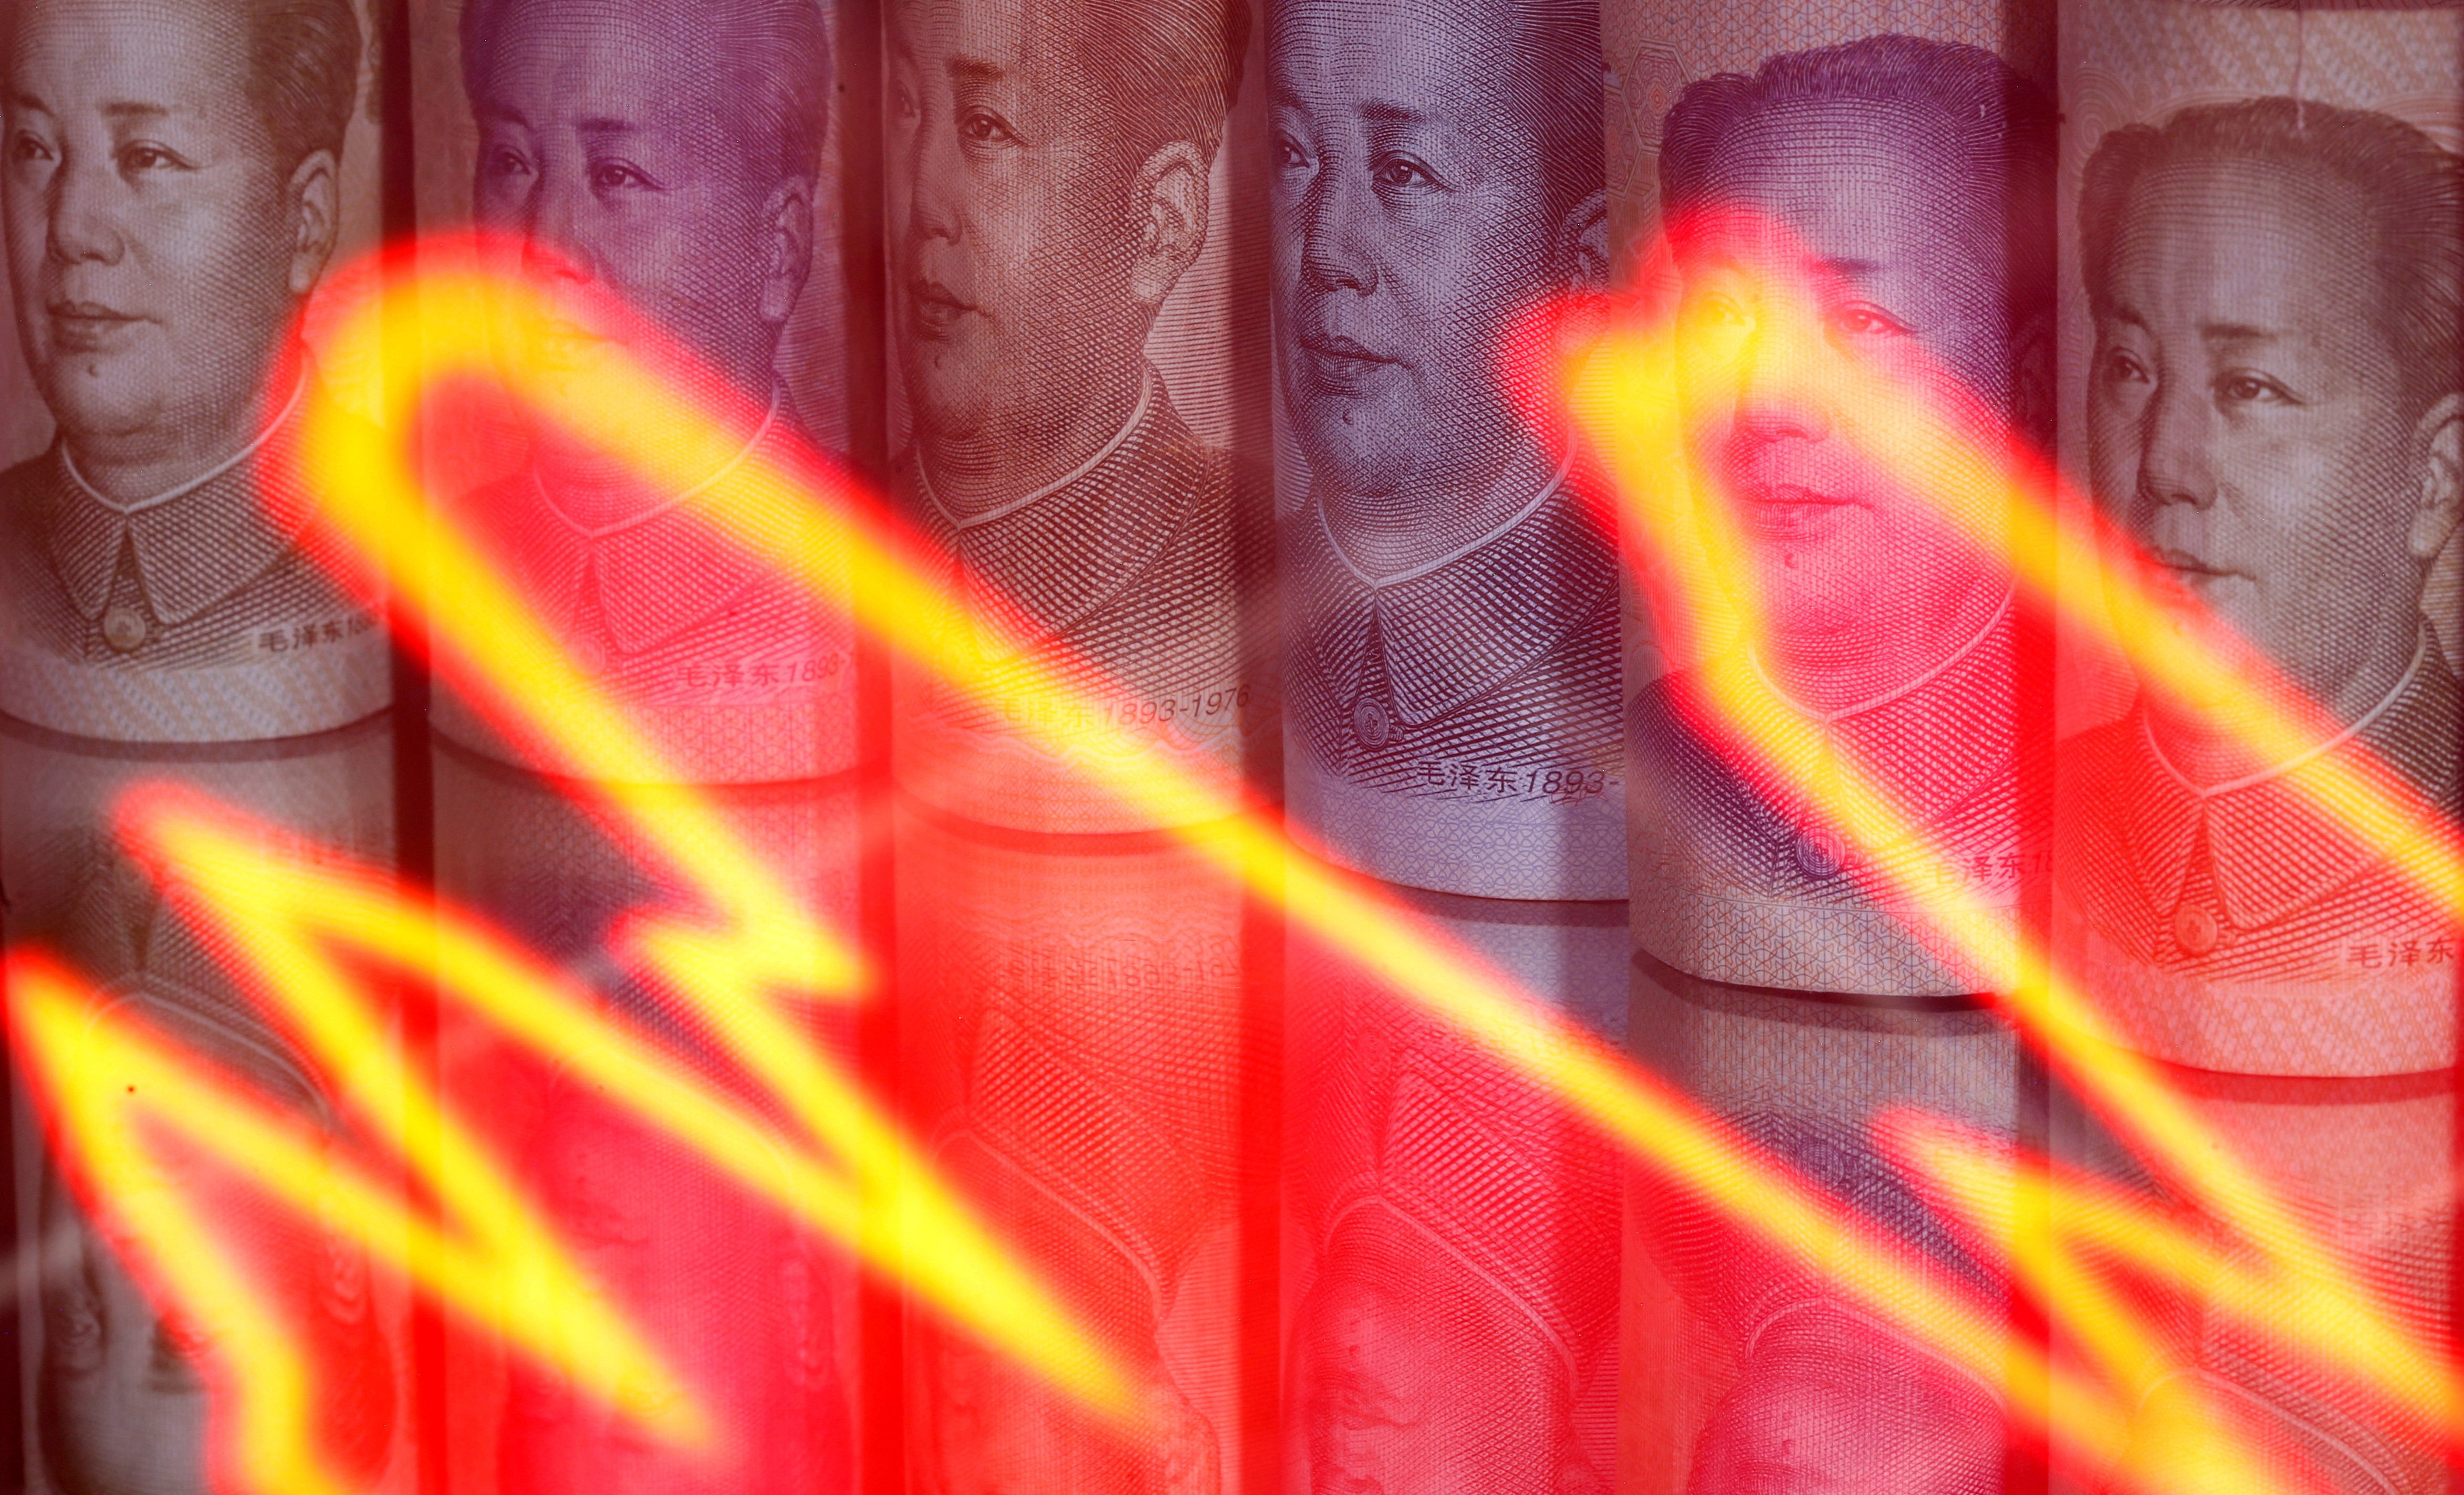 Chinese Yuan banknotes are seen behind illuminated stock graph in this illustration